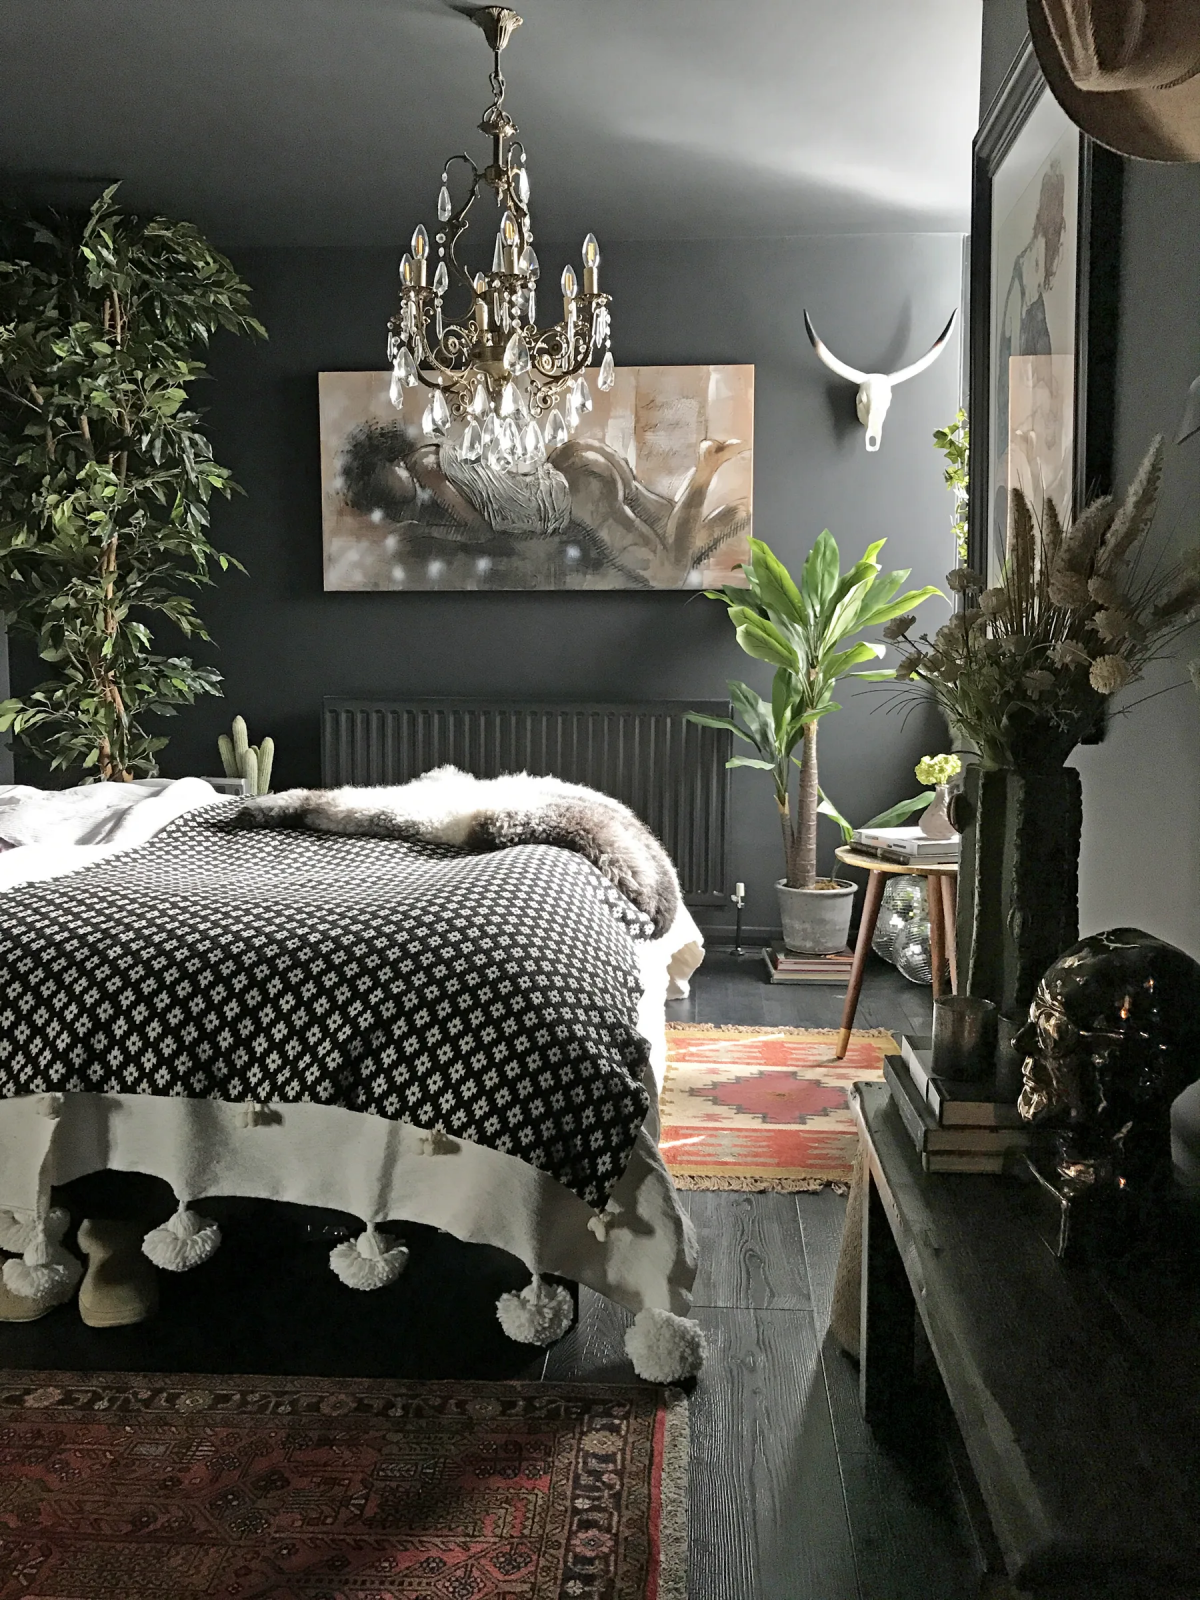 how to make your bedroom more romantic